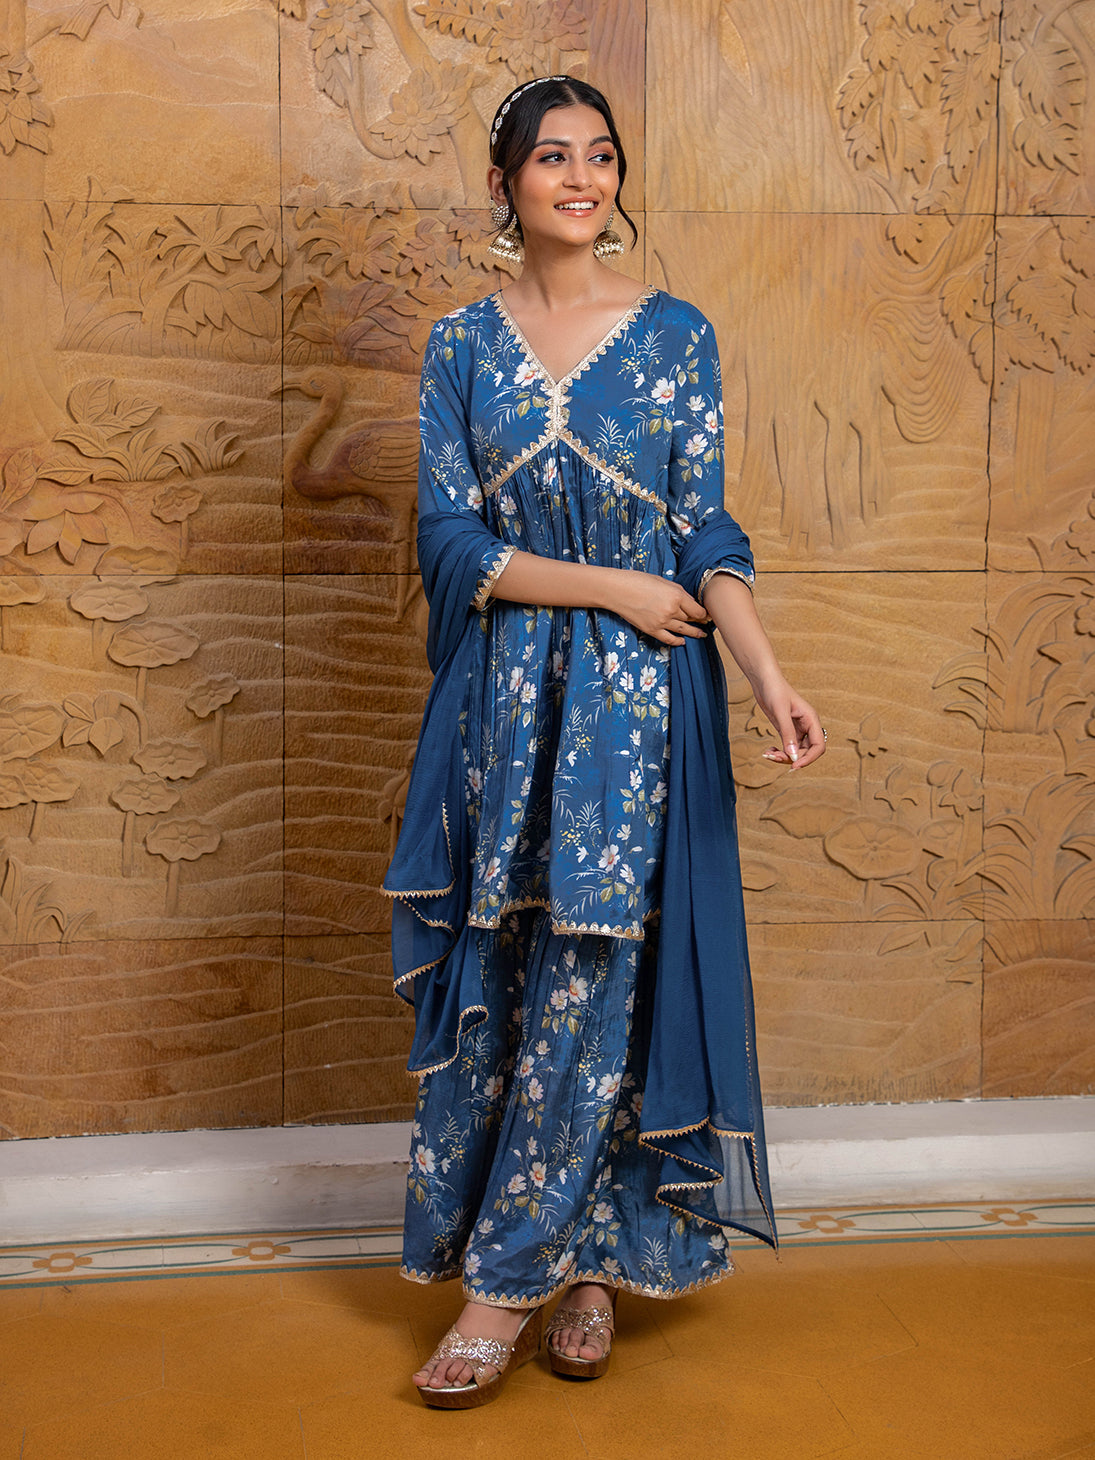 experience-chic-comfort-in-our-blue-digital-printed-sharara-set-effortlessly-stylish-perfect-for-a-modern-and-trendy-look